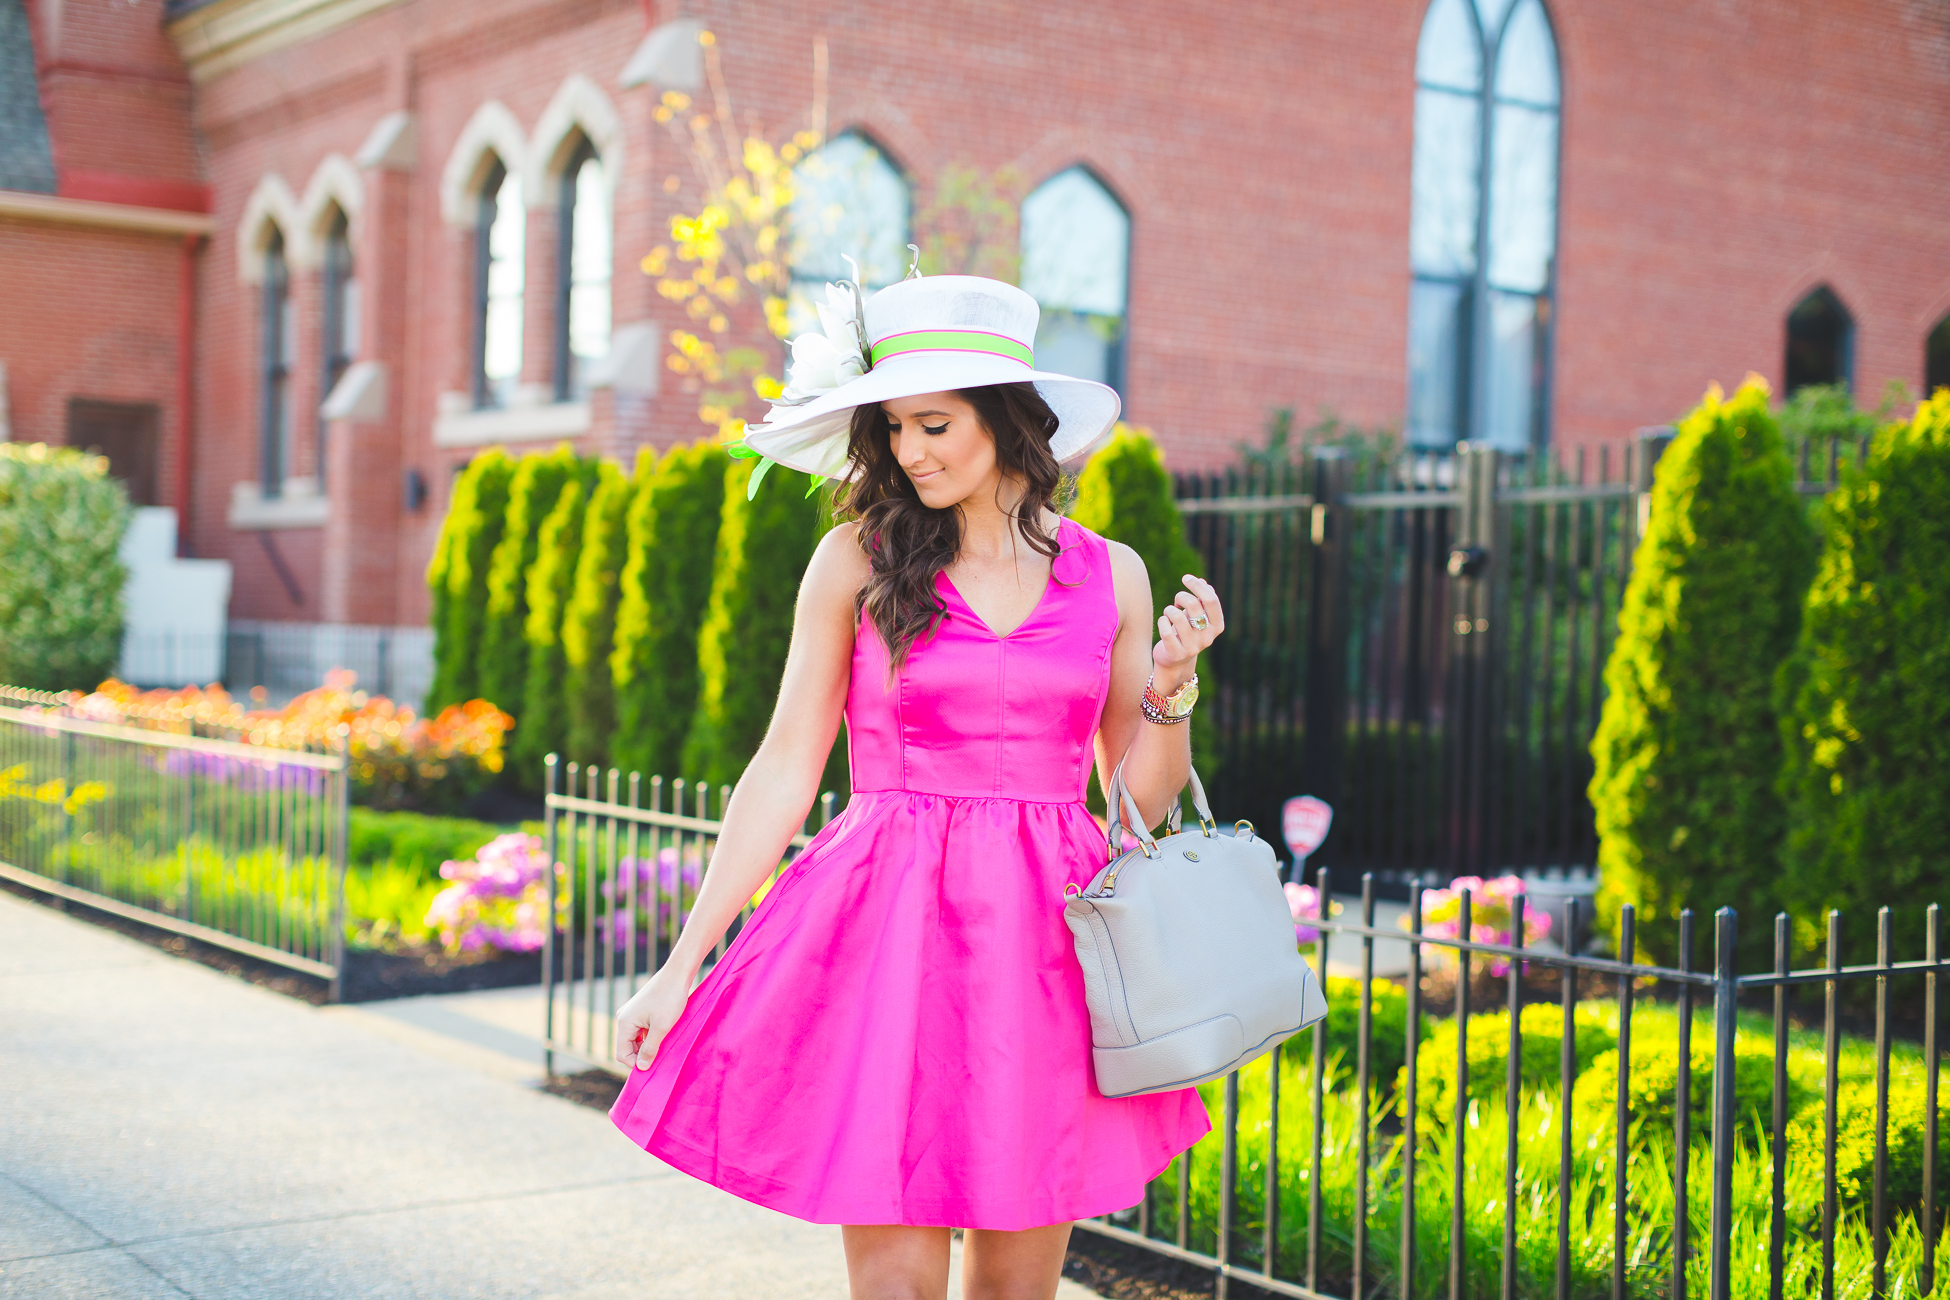 kentucky derby hat, floral hat, vineyard vines pink v-neck fit and flare dress, pink fit and flare dress, spring fit and flare dress, fuchsia dress, kentucky derby outfit, what to wear to the kentucky derby, kentucky oaks, pink fascinator, vineyard vines derby dress, vineyard vines run for the roses dress, gigi new york fold over clutch hot pink, monogram clutch, kentucky derby fascinator, kentucky derby hat, wedding guest outfit, vineyard vines outfit, preppy outfit ideas, preppy fashion, spring dress, spring fashion, preppy spring outfit, preppy spring fashion, preppy spring dress, large monogram necklace, kentucky derby attire // grace wainwright a southern drawl